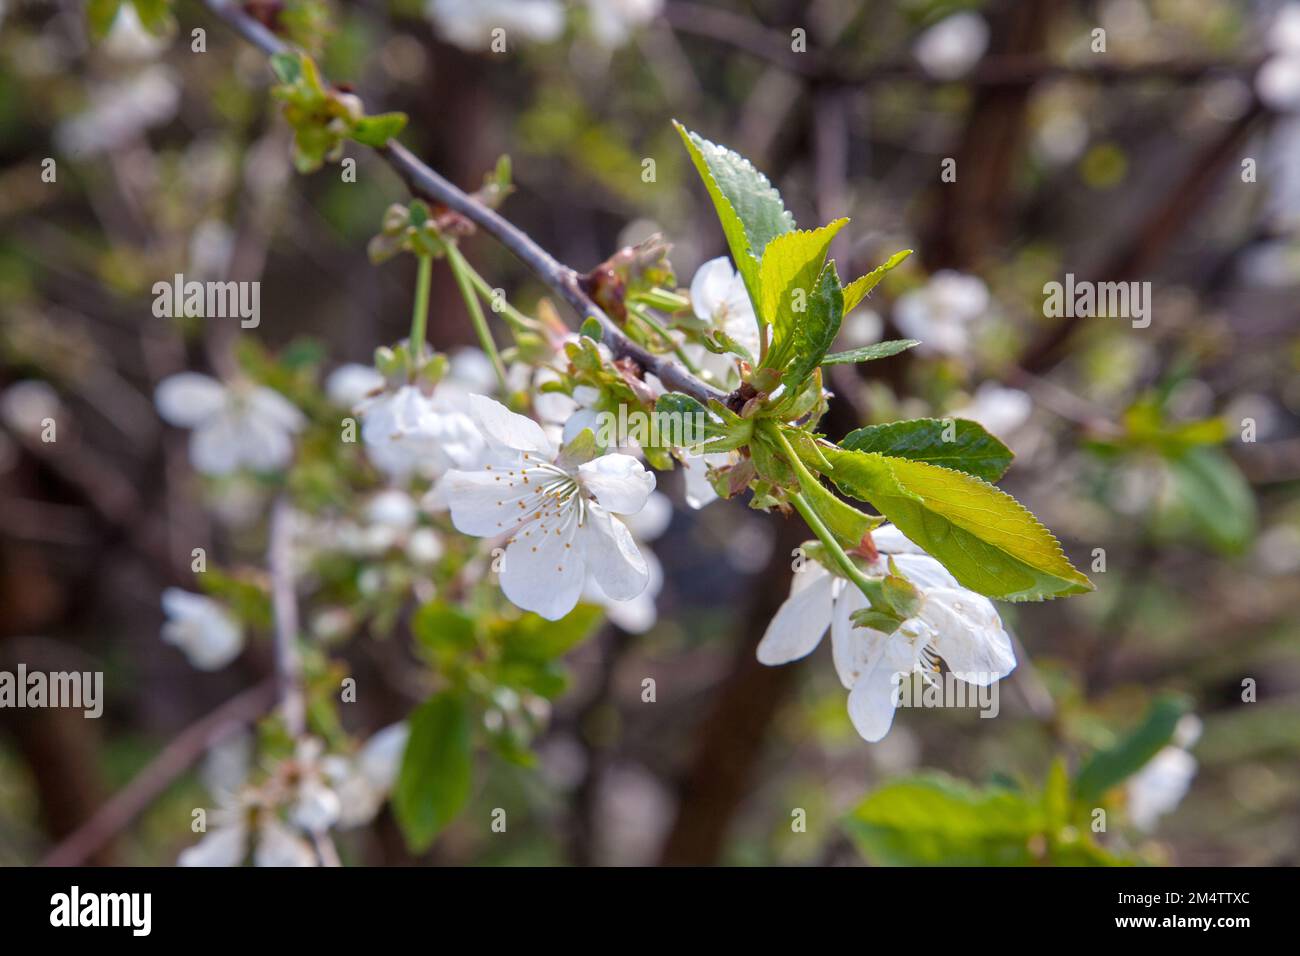 Fruit orchard at spring time with blossoming cherry trees. Close up view of branch with small green leaves and white flowers of cherry tree in garden. Stock Photo